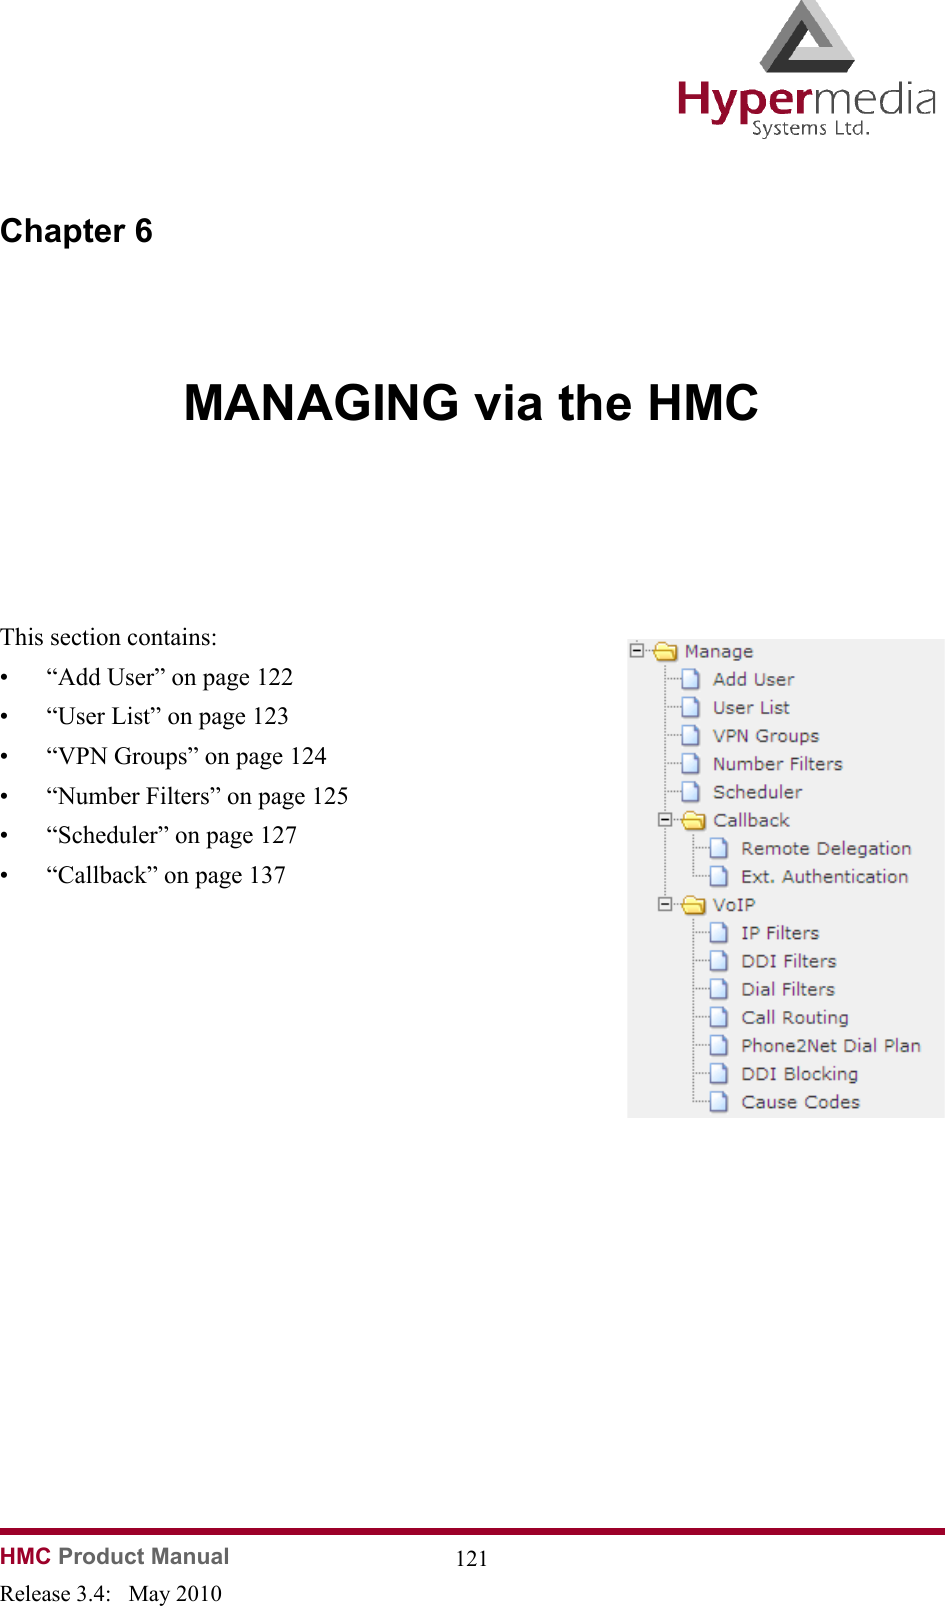 HMC Product Manual  121Release 3.4:   May 2010Chapter 6MANAGING via the HMC              This section contains:• “Add User” on page 122• “User List” on page 123• “VPN Groups” on page 124• “Number Filters” on page 125• “Scheduler” on page 127• “Callback” on page 137